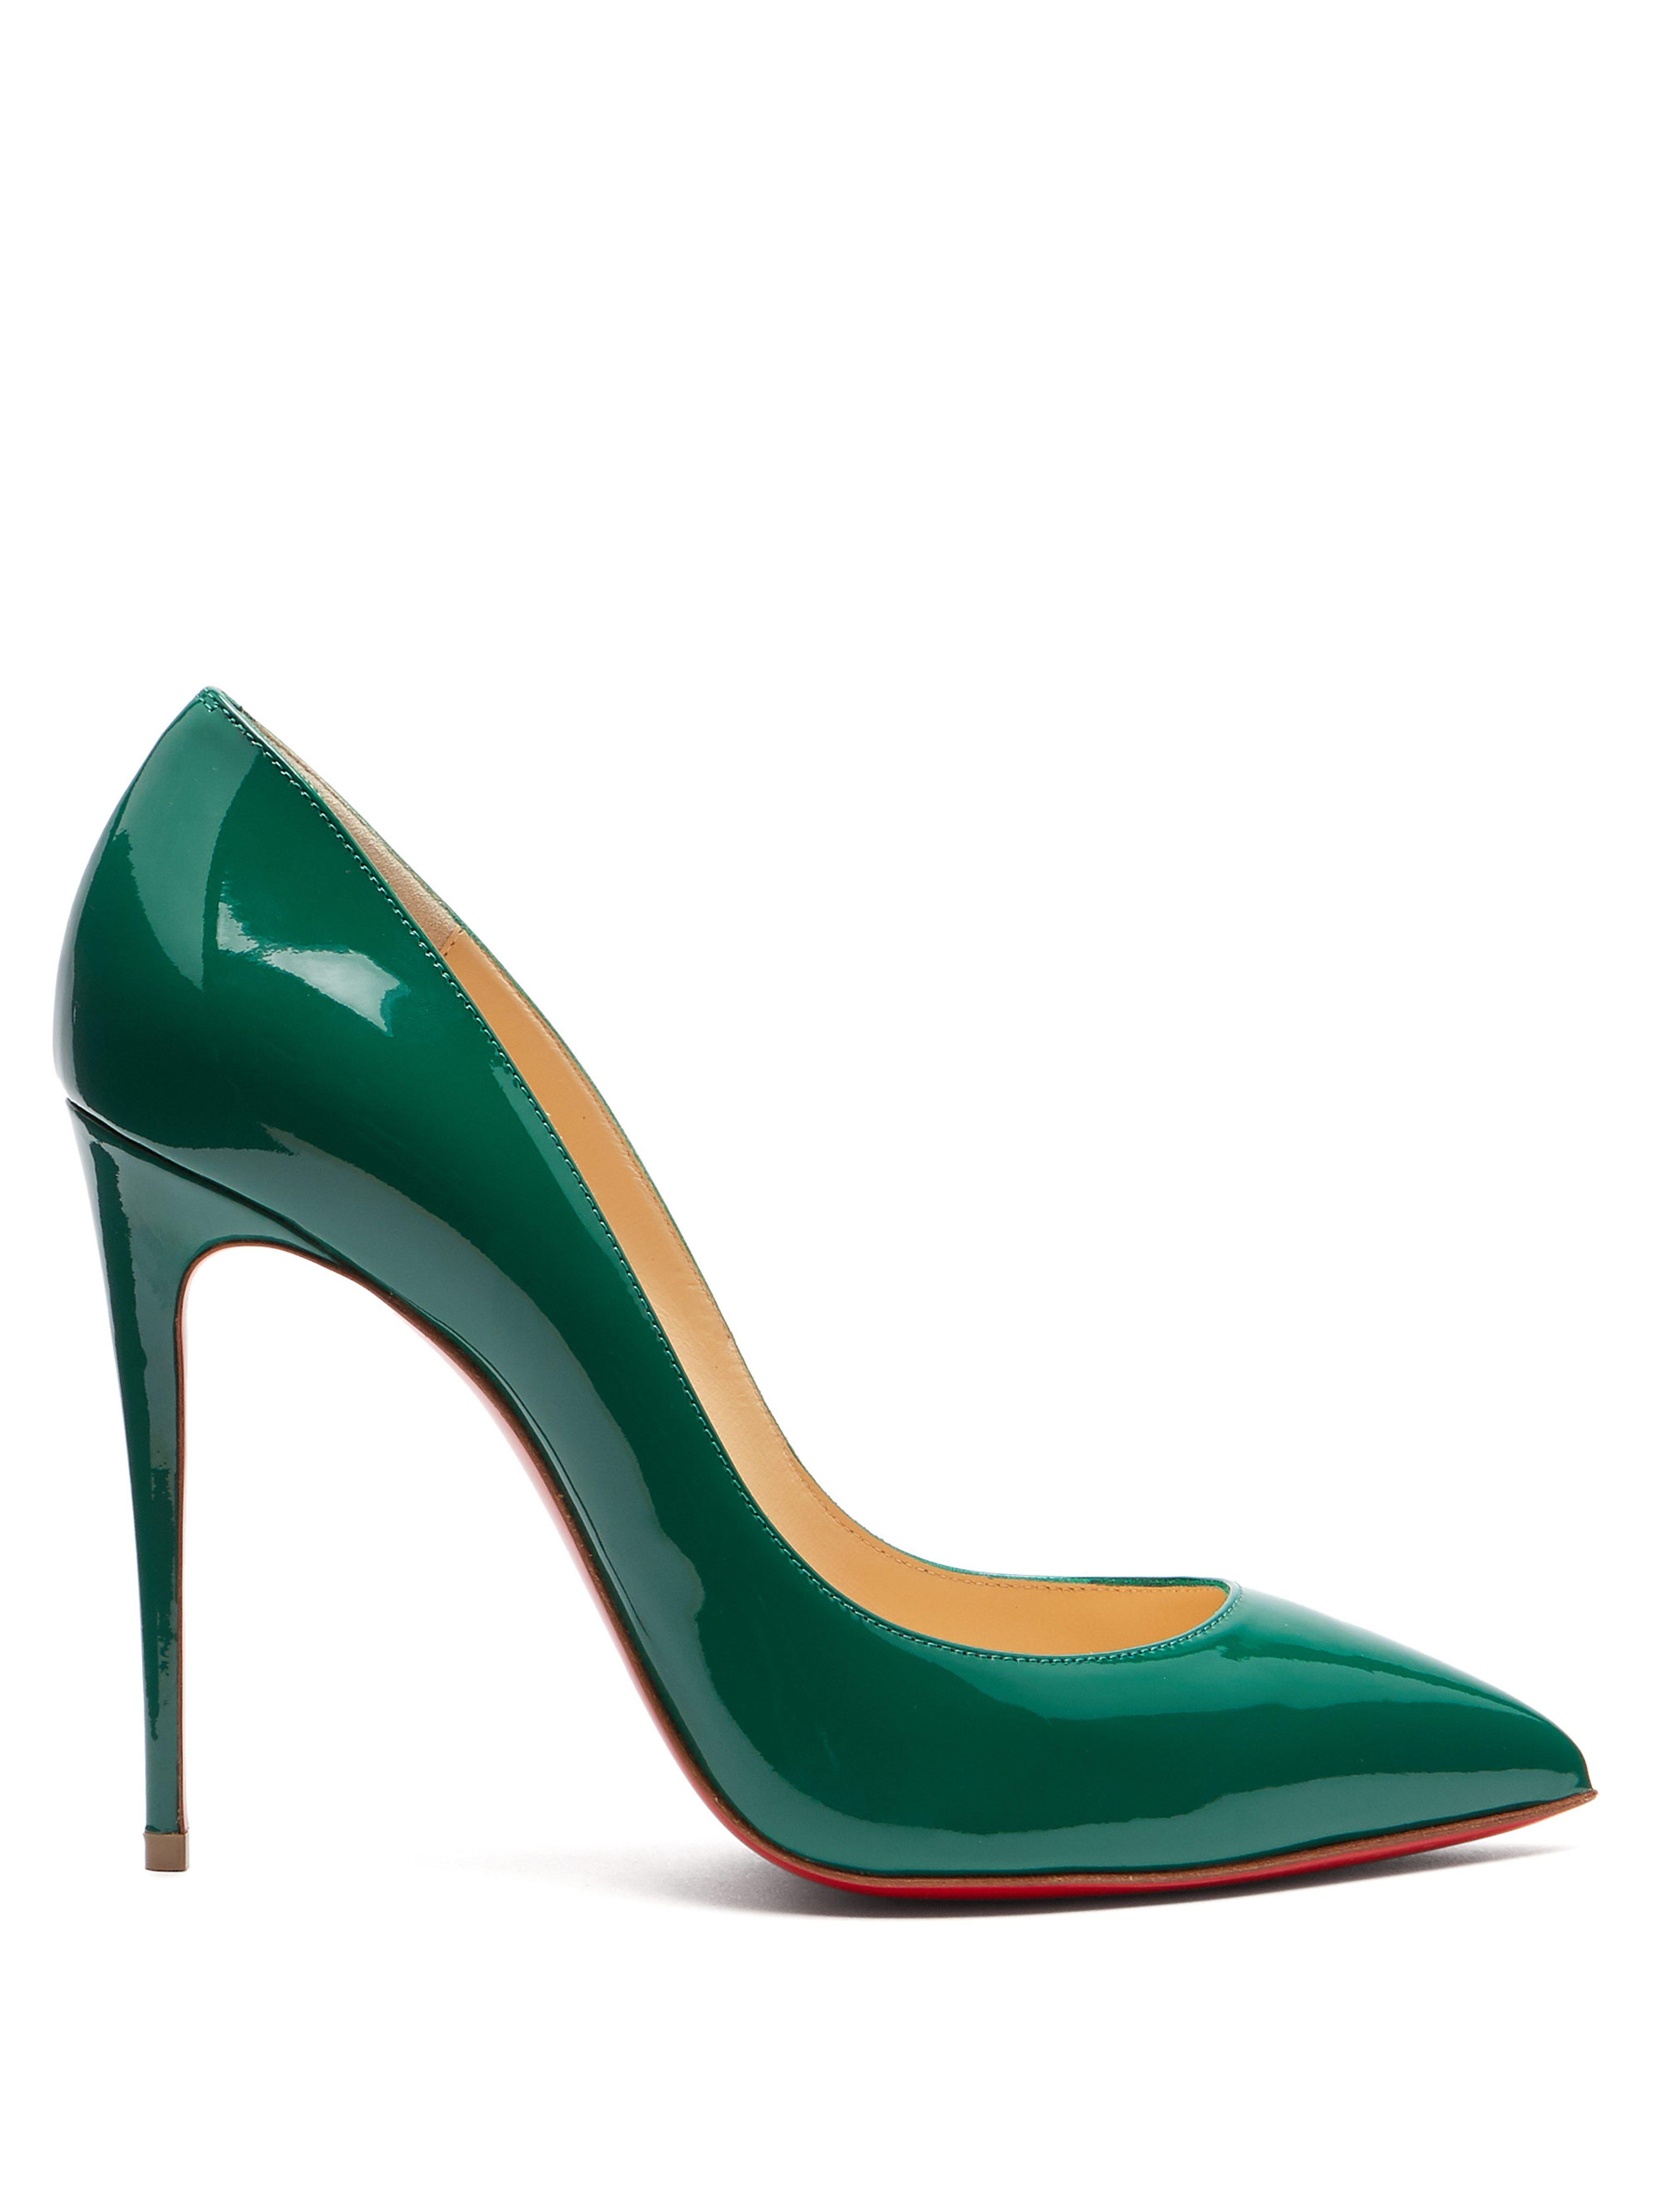 Christian Louboutin Pigalle Follies 100 Patent Leather Pumps in Green ...